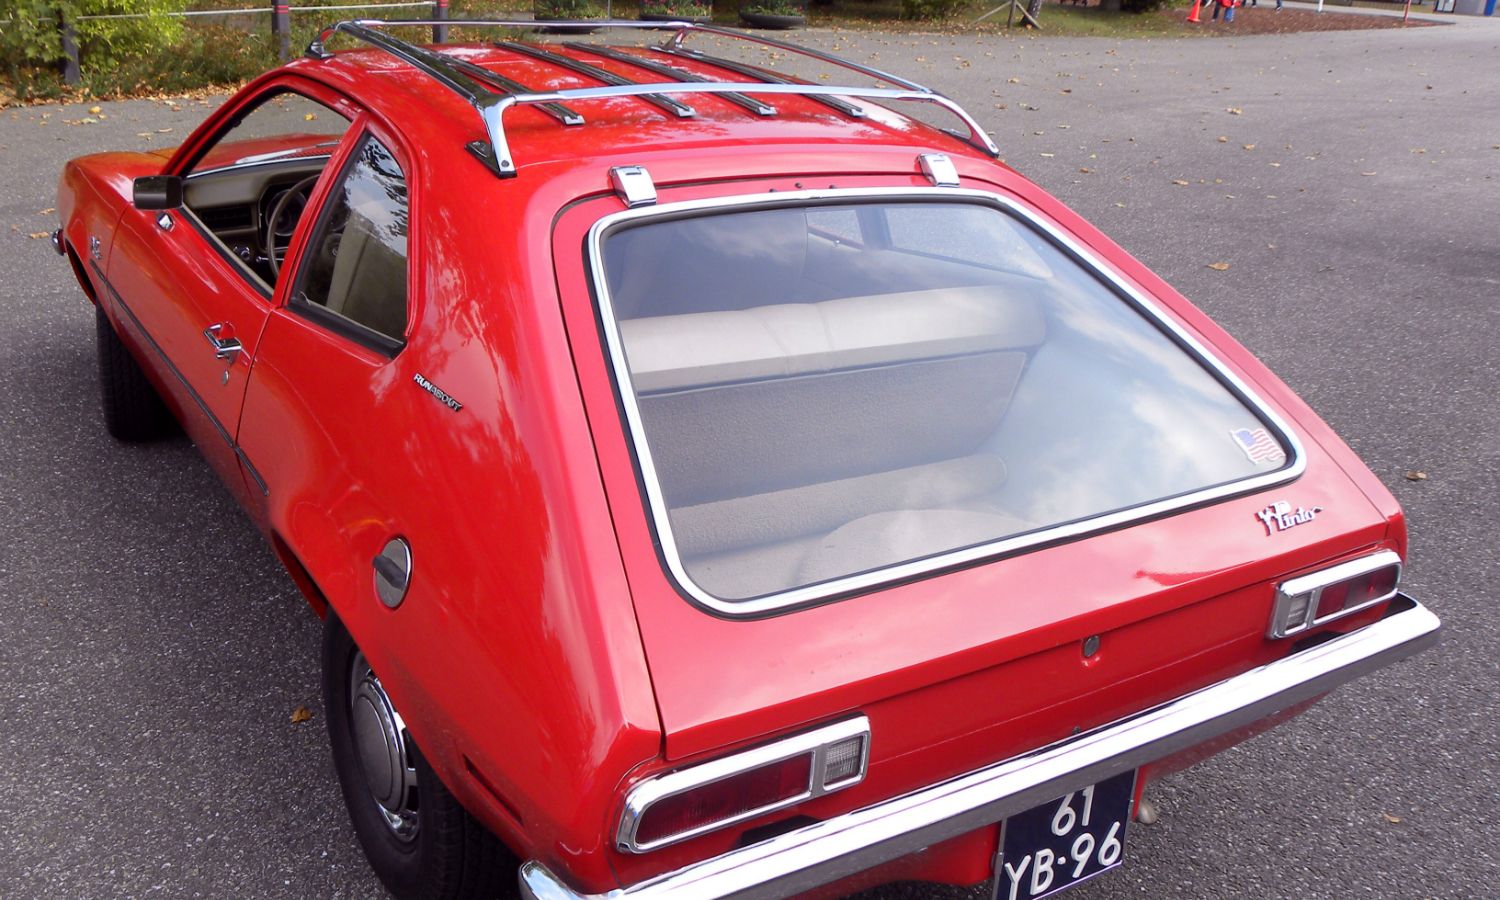 Ford pinto class action #2